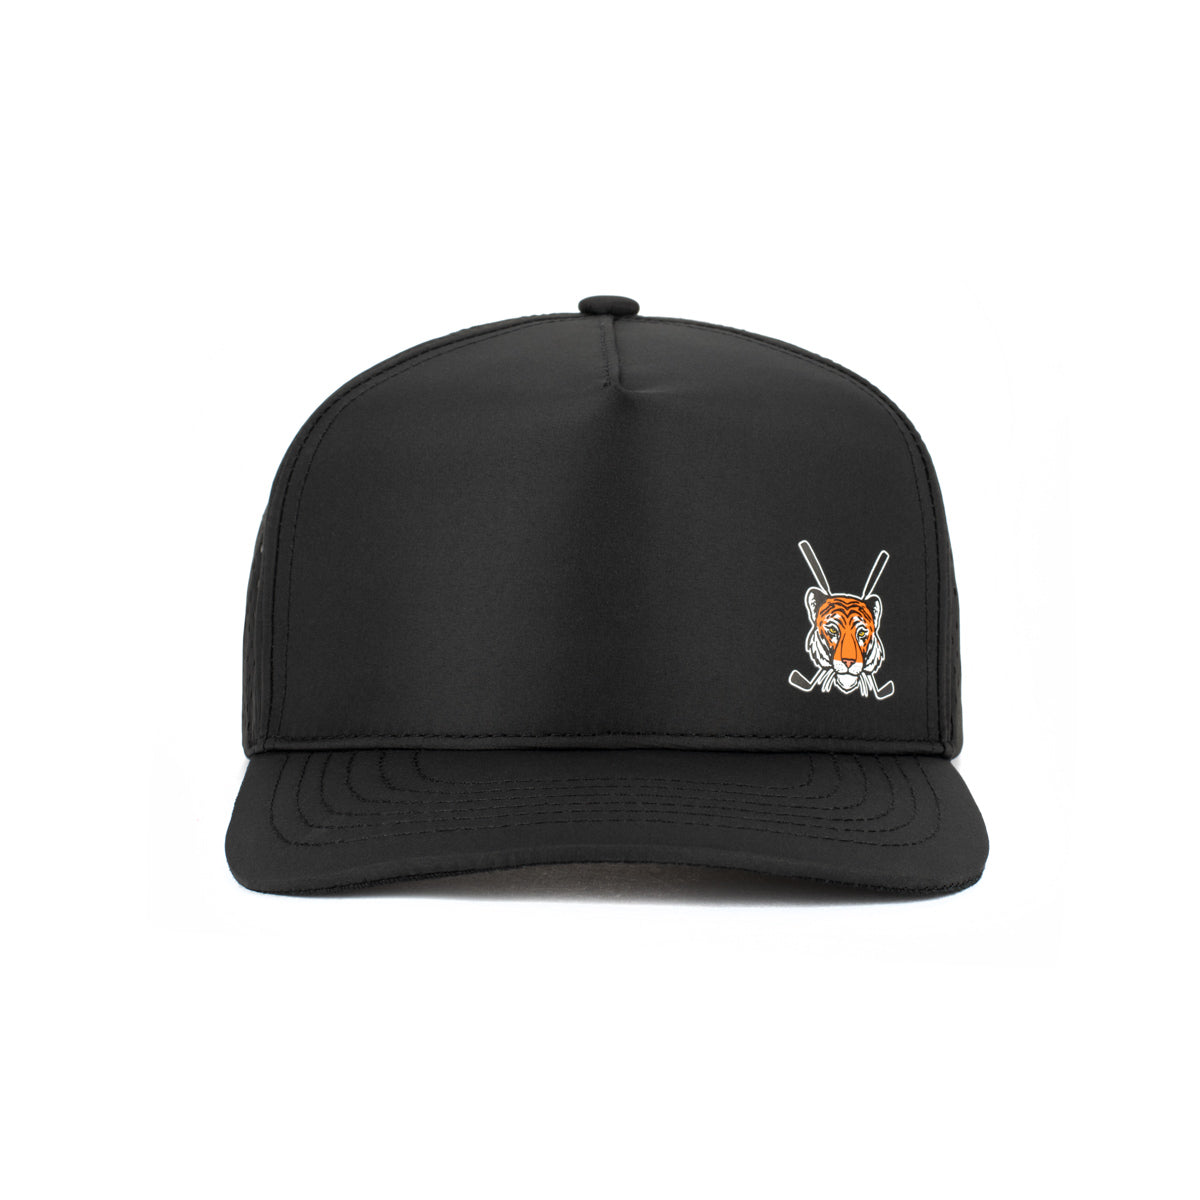 Barstool Golf Tiger Performance Hat-Hats-Fore Play-Black-Barstool Sports